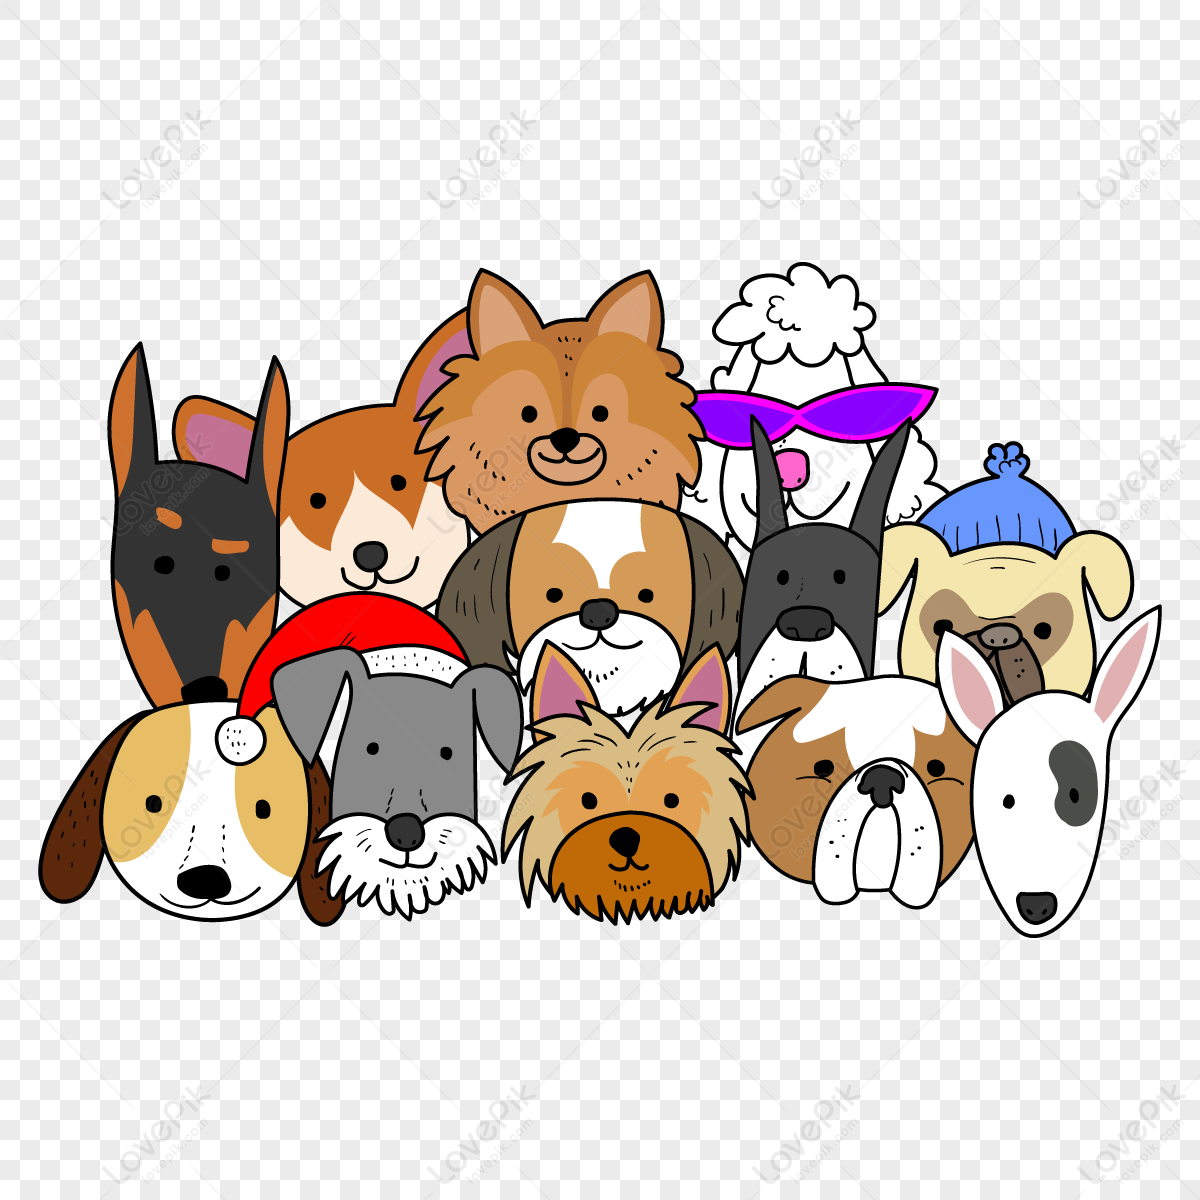 A Lovely Dog PNG Transparent Background And Clipart Image For Free Download  - Lovepik | 400174750